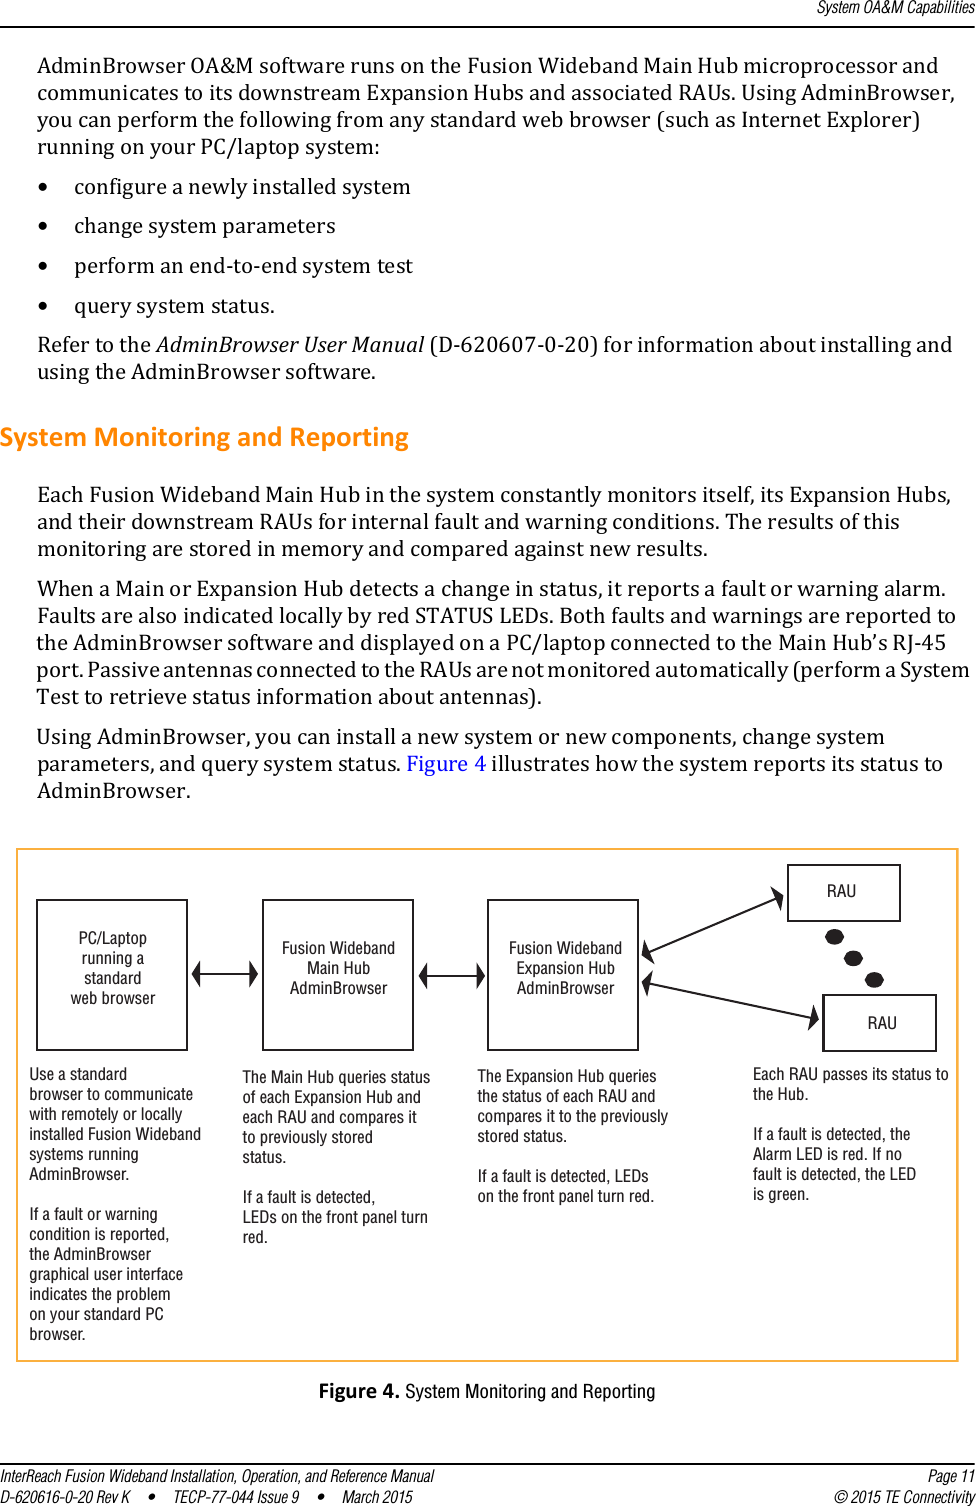 System OA&amp;M CapabilitiesInterReach Fusion Wideband Installation, Operation, and Reference Manual Page 11D-620616-0-20 Rev K  •  TECP-77-044 Issue 9  •  March 2015 © 2015 TE ConnectivityAdminBrowser OA&amp;M software runs on the Fusion Wideband Main Hub microprocessor and communicates to its downstream Expansion Hubs and associated RAUs. Using AdminBrowser, you can perform the following from any standard web browser (such as Internet Explorer) running on your PC/laptop system:•configure a newly installed system•change system parameters•perform an end-to-end system test•query system status.Refer to the AdminBrowser User Manual (D-620607-0-20) for information about installing and using the AdminBrowser software.System Monitoring and ReportingEach Fusion Wideband Main Hub in the system constantly monitors itself, its Expansion Hubs, and their downstream RAUs for internal fault and warning conditions. The results of this monitoring are stored in memory and compared against new results.When a Main or Expansion Hub detects a change in status, it reports a fault or warning alarm. Faults are also indicated locally by red STATUS LEDs. Both faults and warnings are reported to the AdminBrowser software and displayed on a PC/laptop connected to the Main Hub’s RJ-45 port. Passive antennas connected to the RAUs are not monitored automatically (perform a System Test to retrieve status information about antennas).Using AdminBrowser, you can install a new system or new components, change system parameters, and query system status. Figure 4 illustrates how the system reports its status to AdminBrowser.Figure 4. System Monitoring and Reporting PC/Laptoprunning astandardweb browserFusion WidebandMain HubAdminBrowserFusion WidebandExpansion HubAdminBrowserRAURAUUse a standardbrowser to communicatewith remotely or locally installed Fusion Widebandsystems running AdminBrowser. If a fault or warning condition is reported, the AdminBrowser graphical user interface indicates the problem on your standard PC browser.The Main Hub queries status of each Expansion Hub and each RAU and compares it to previously stored status. If a fault is detected, LEDs on the front panel turn red.The Expansion Hub queries the status of each RAU and compares it to the previously stored status.If a fault is detected, LEDs on the front panel turn red.Each RAU passes its status to the Hub.If a fault is detected, the Alarm LED is red. If no fault is detected, the LED is green.